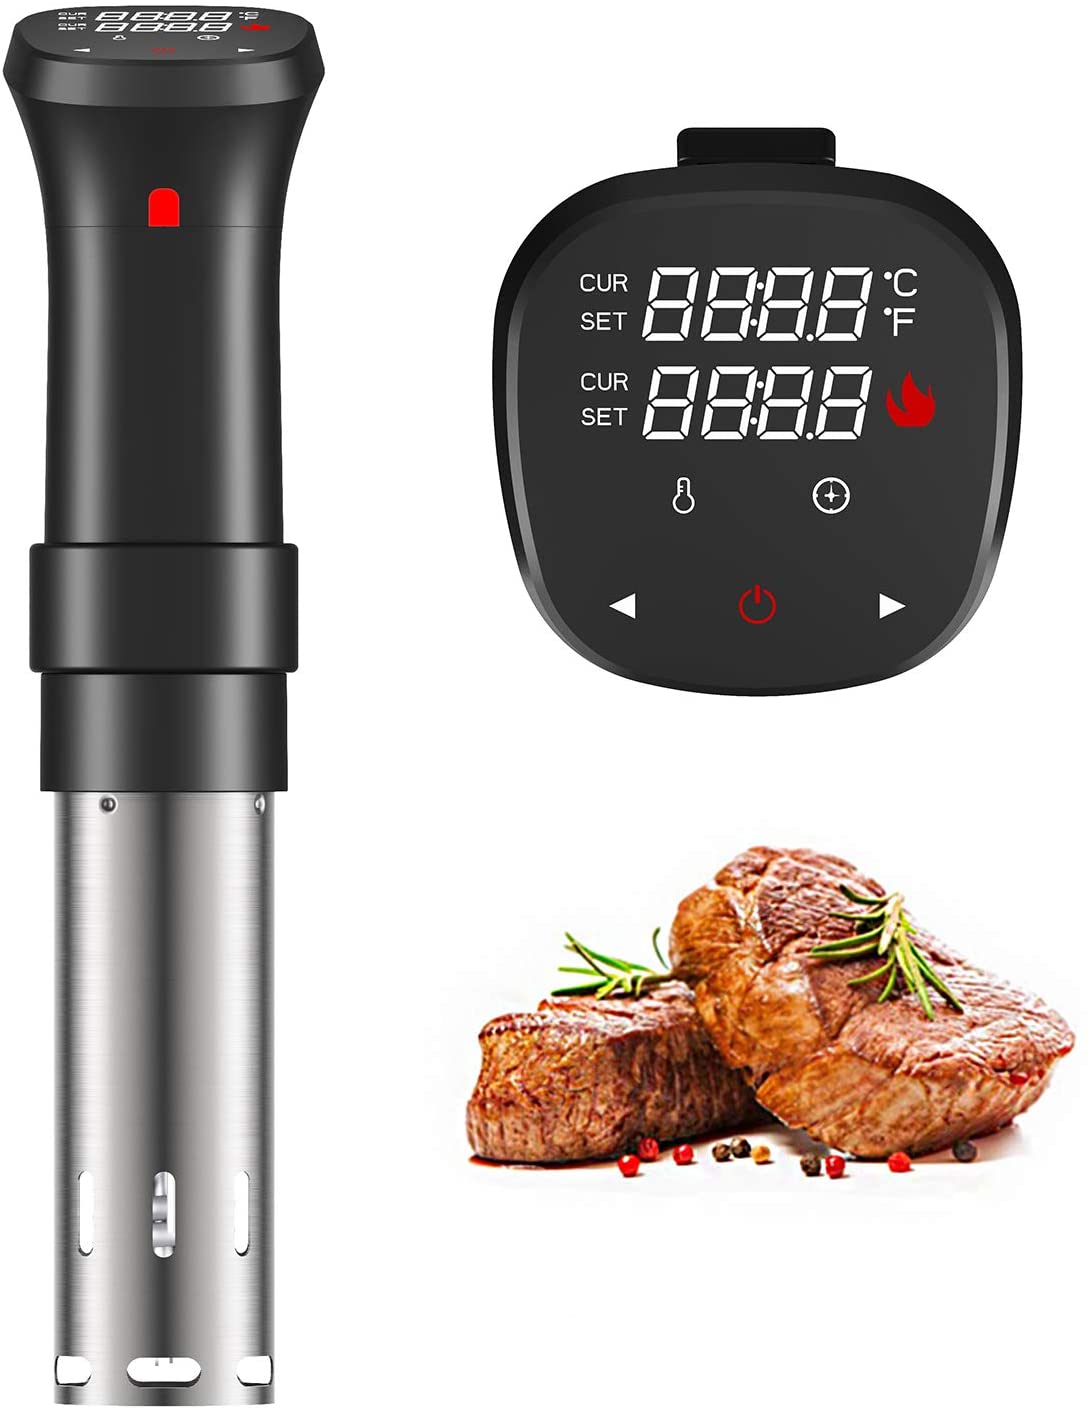 Fityou 1100-Watt Thermal Sous Vide For The Home Cook